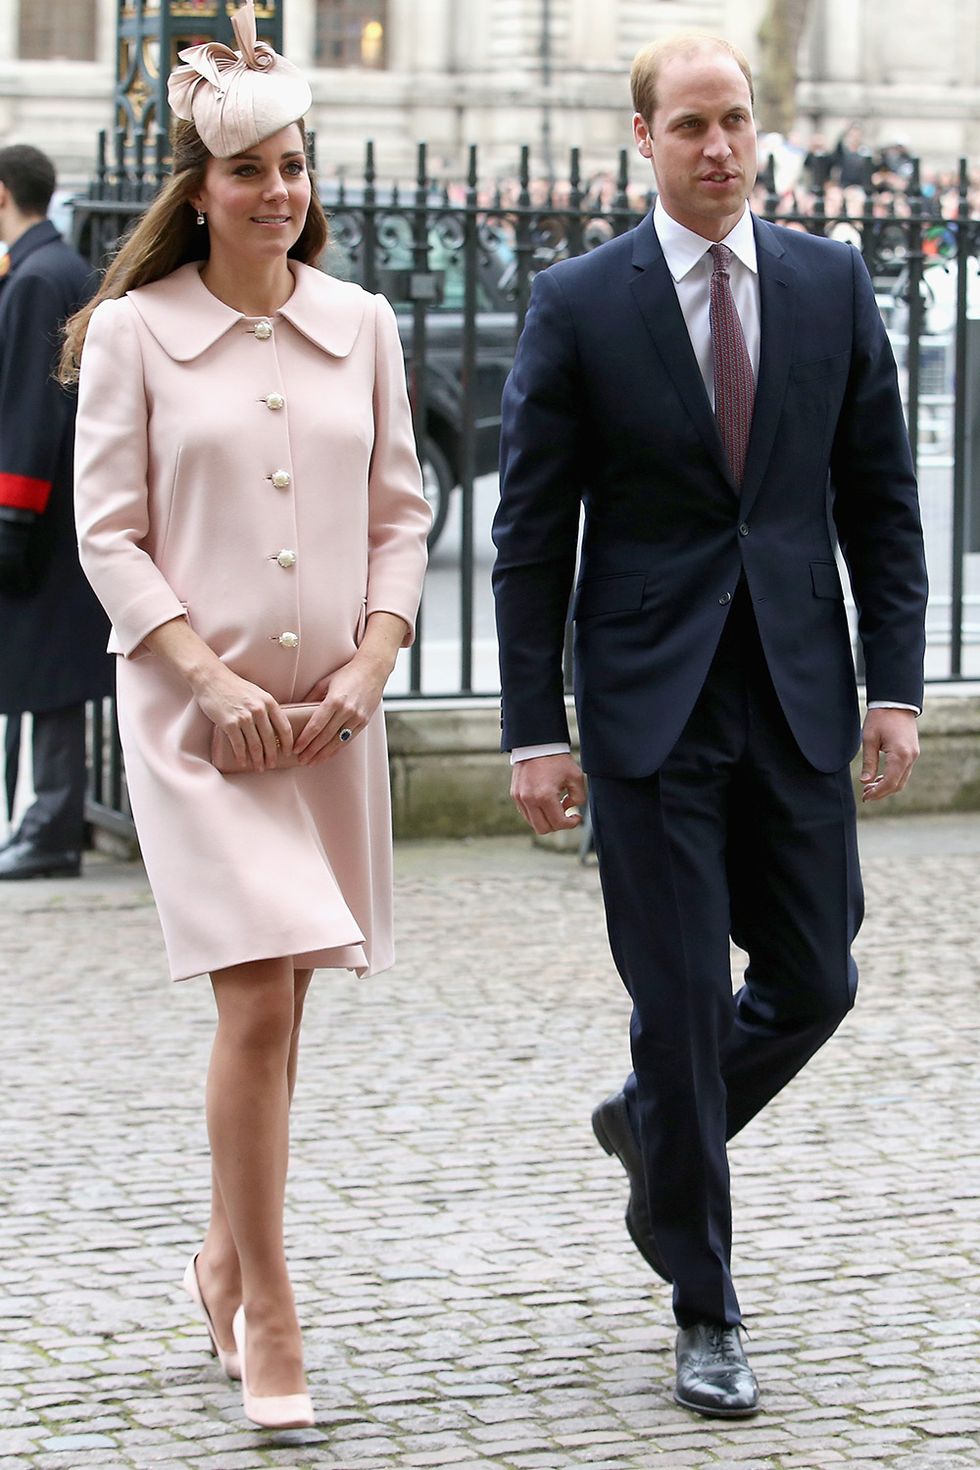 <p>Even Prince William and Kate haven't broken this tradition yet. It's <a href="http://www.bbc.com/news/uk-22976895" target="_blank" data-tracking-id="recirc-text-link">rumored</a> they didn't even know&nbsp;Prince George's gender themselves.&nbsp;</p>